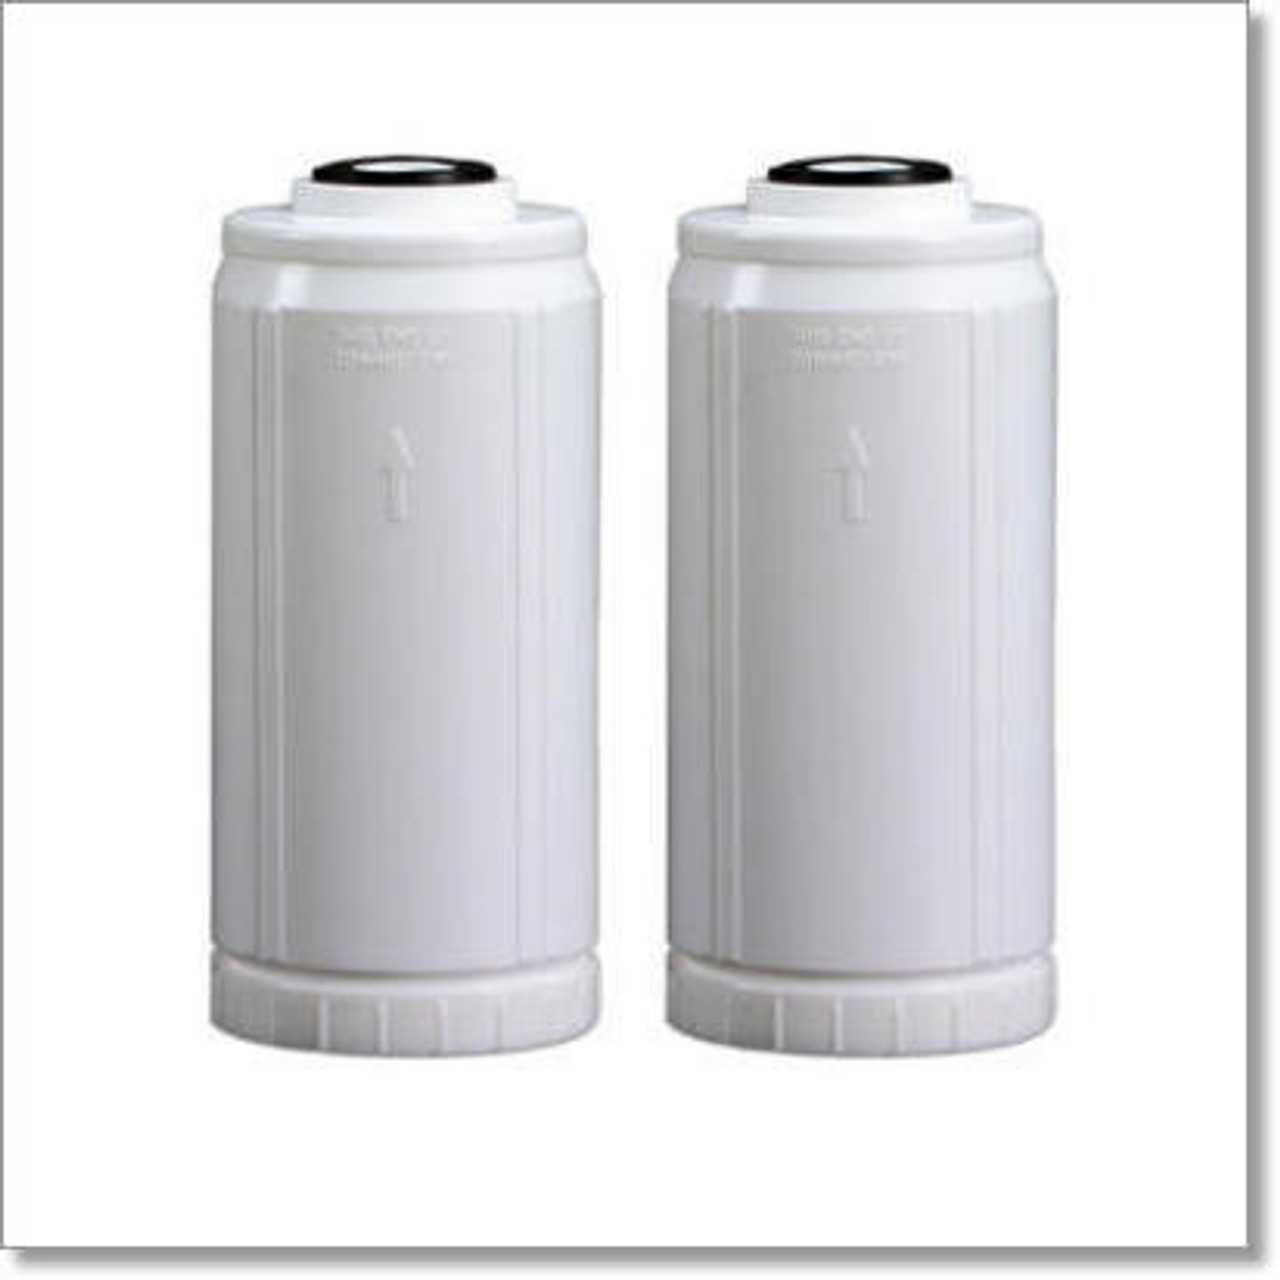 DIW-10 Medium Output Wall Mounted Spotless Water Filtration System